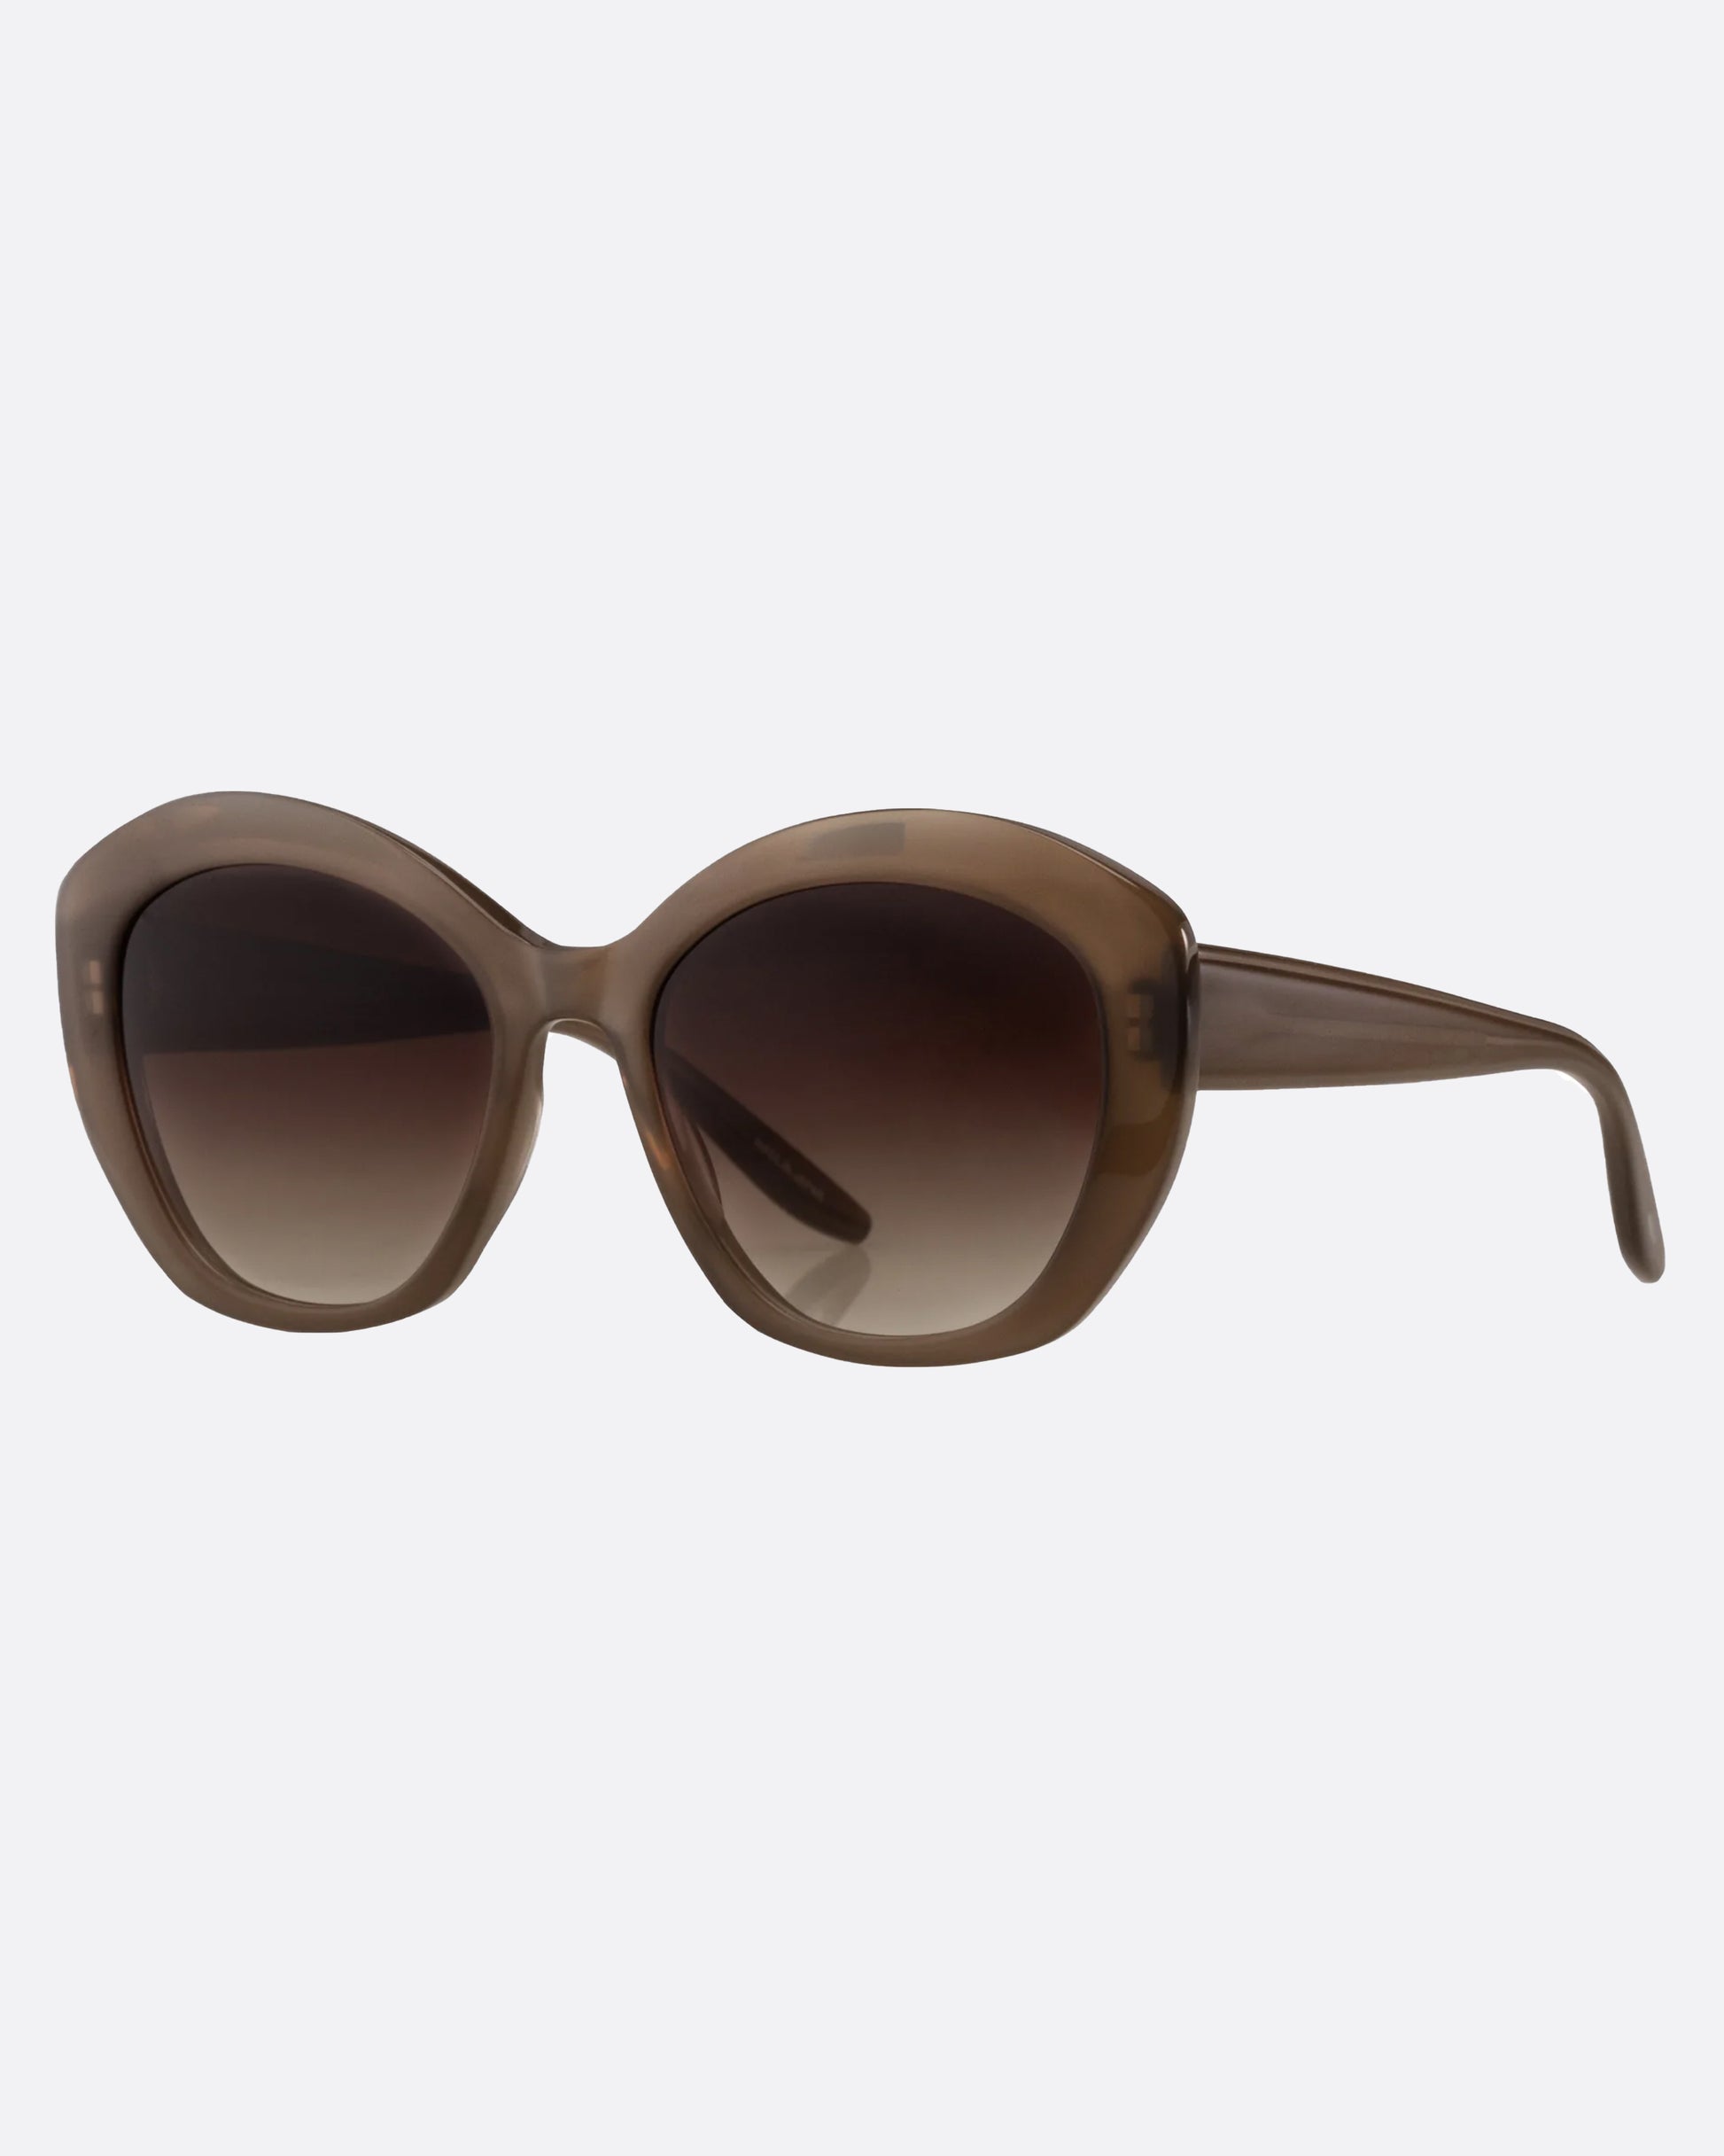 A retro update of mod sunglasses constructed in Japanese acetate.